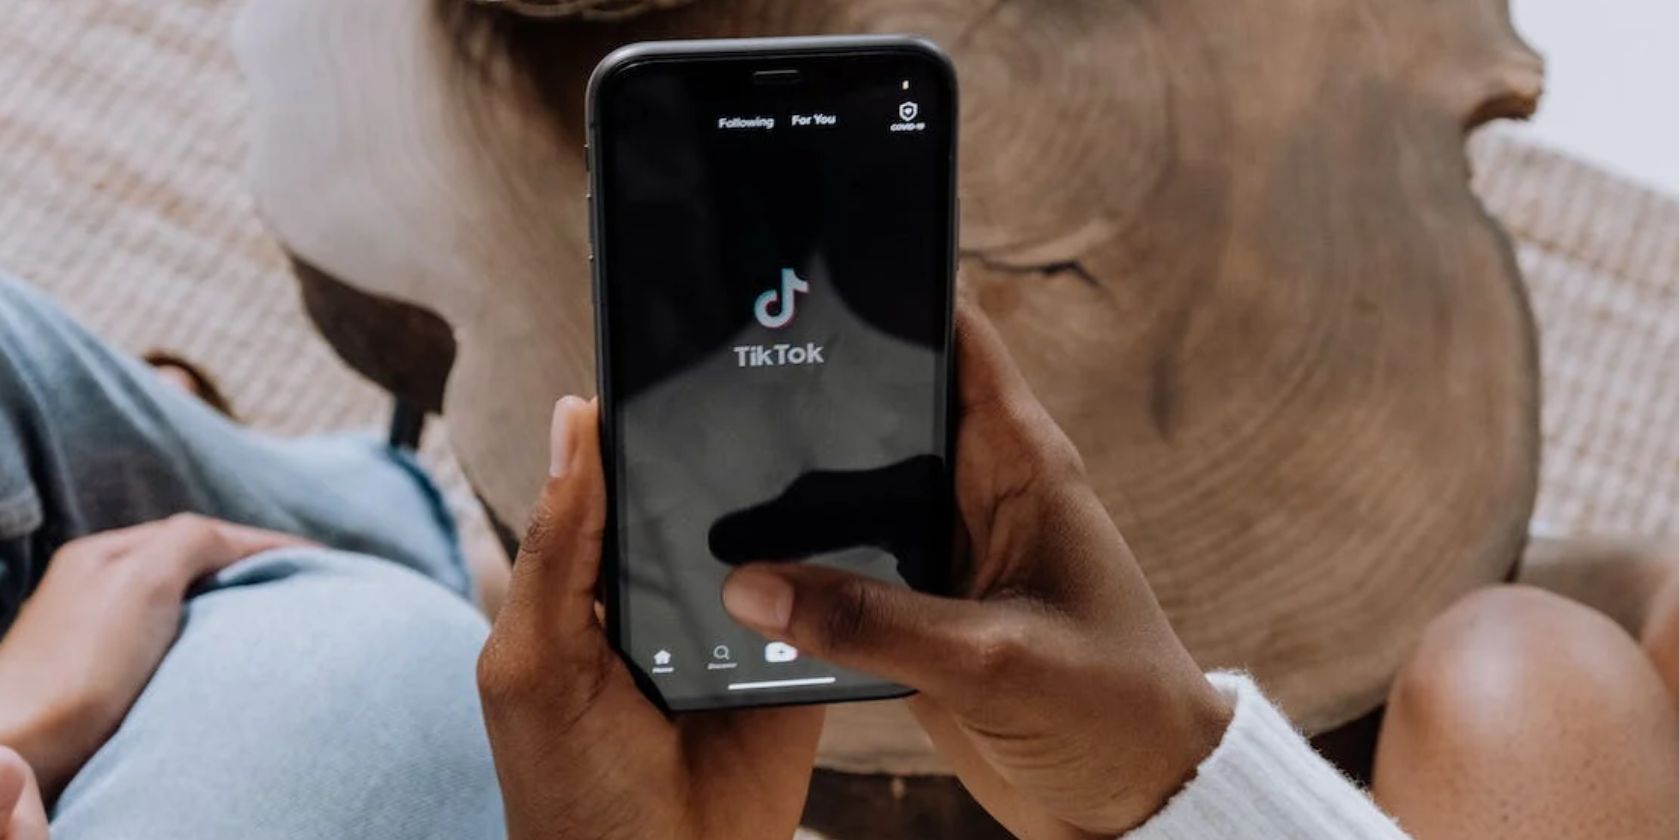 Person holding a smartphone with the TikTok app open on screen